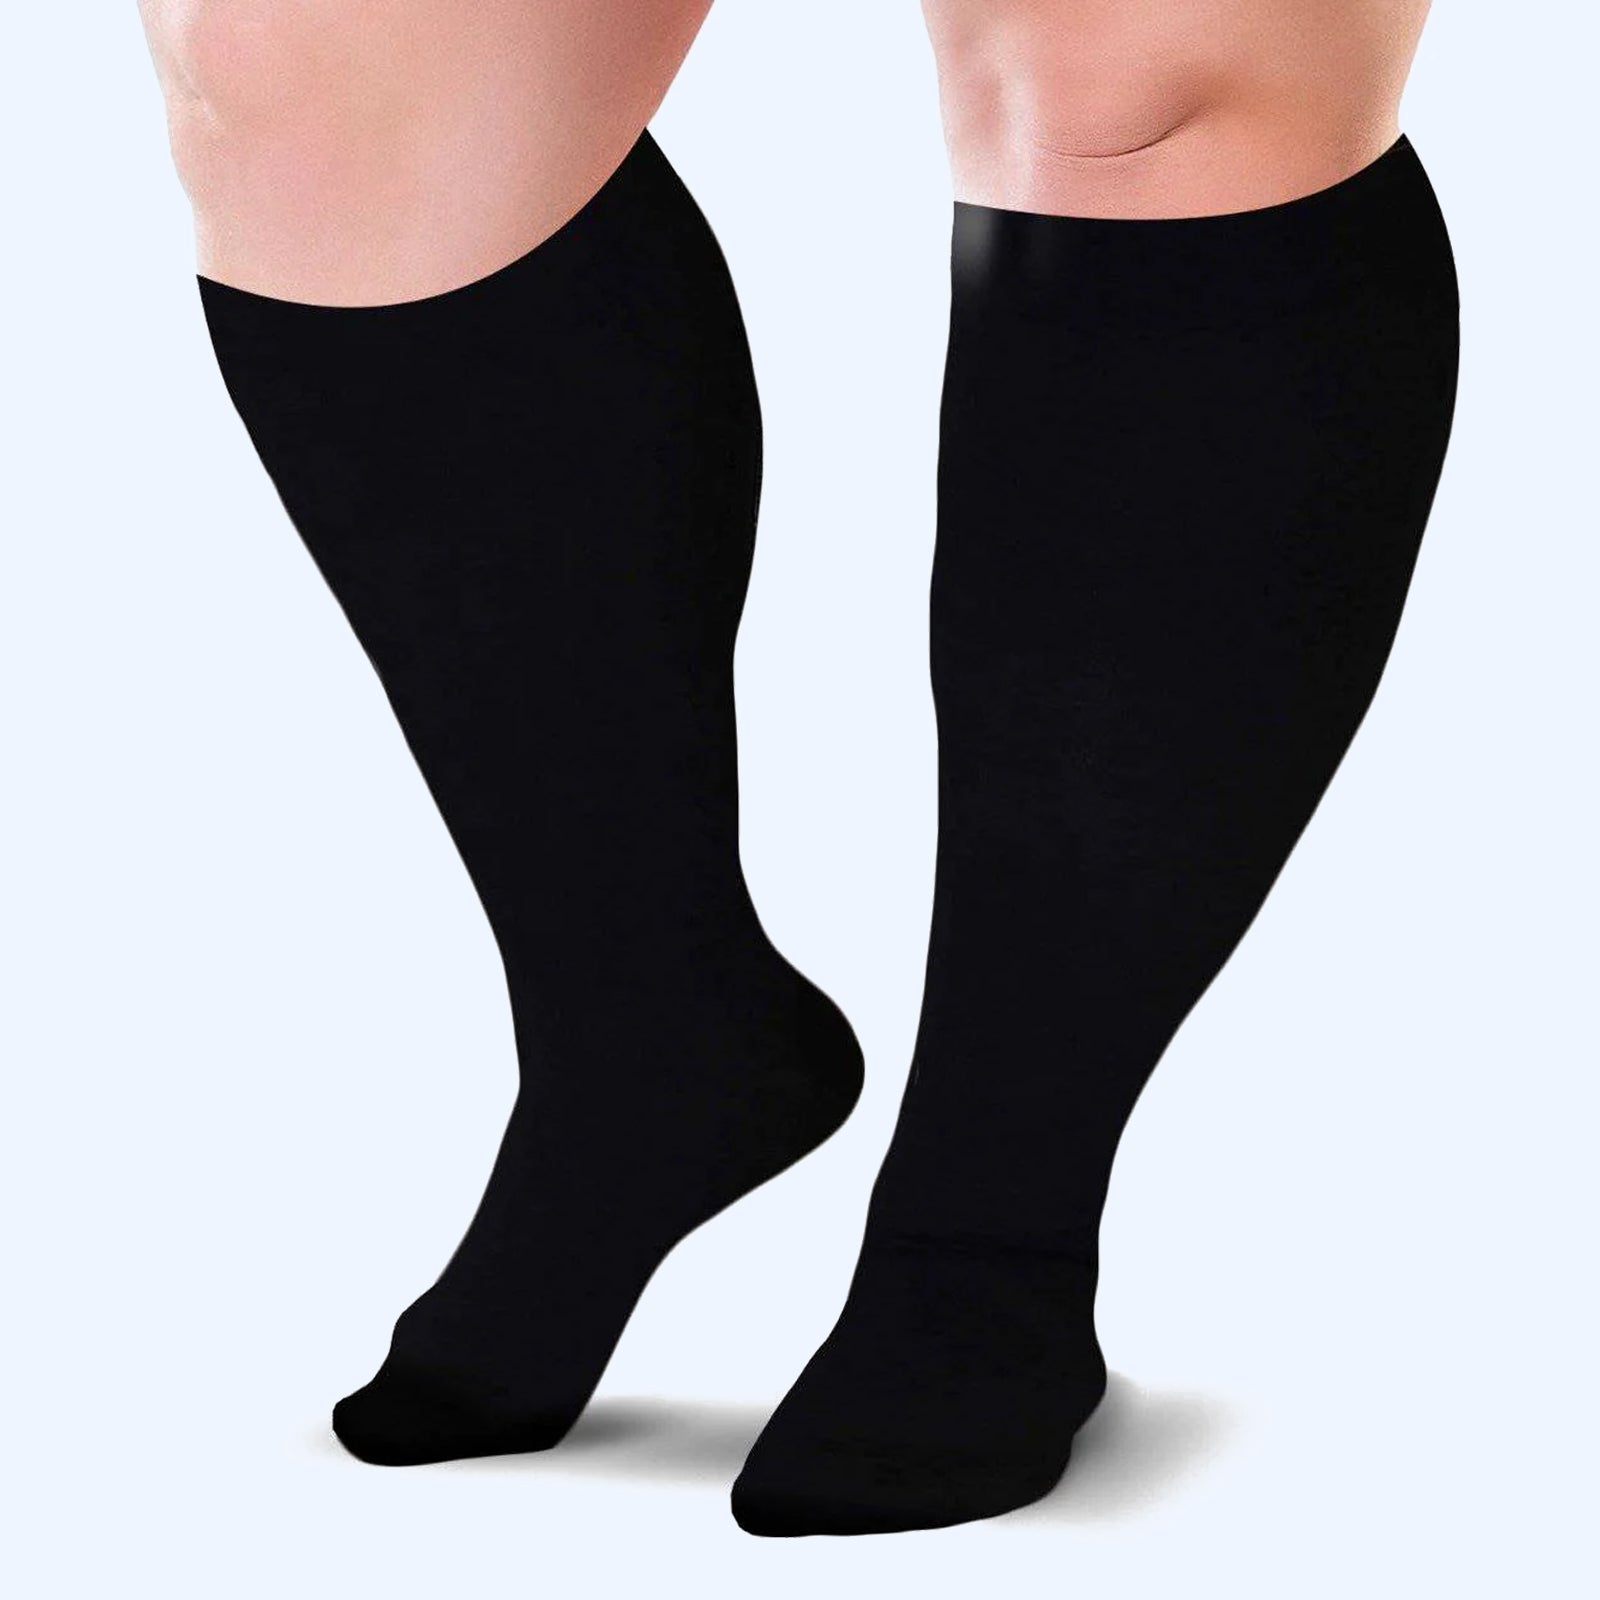 Compression Socks 20-30 for Men(M to High Stocking